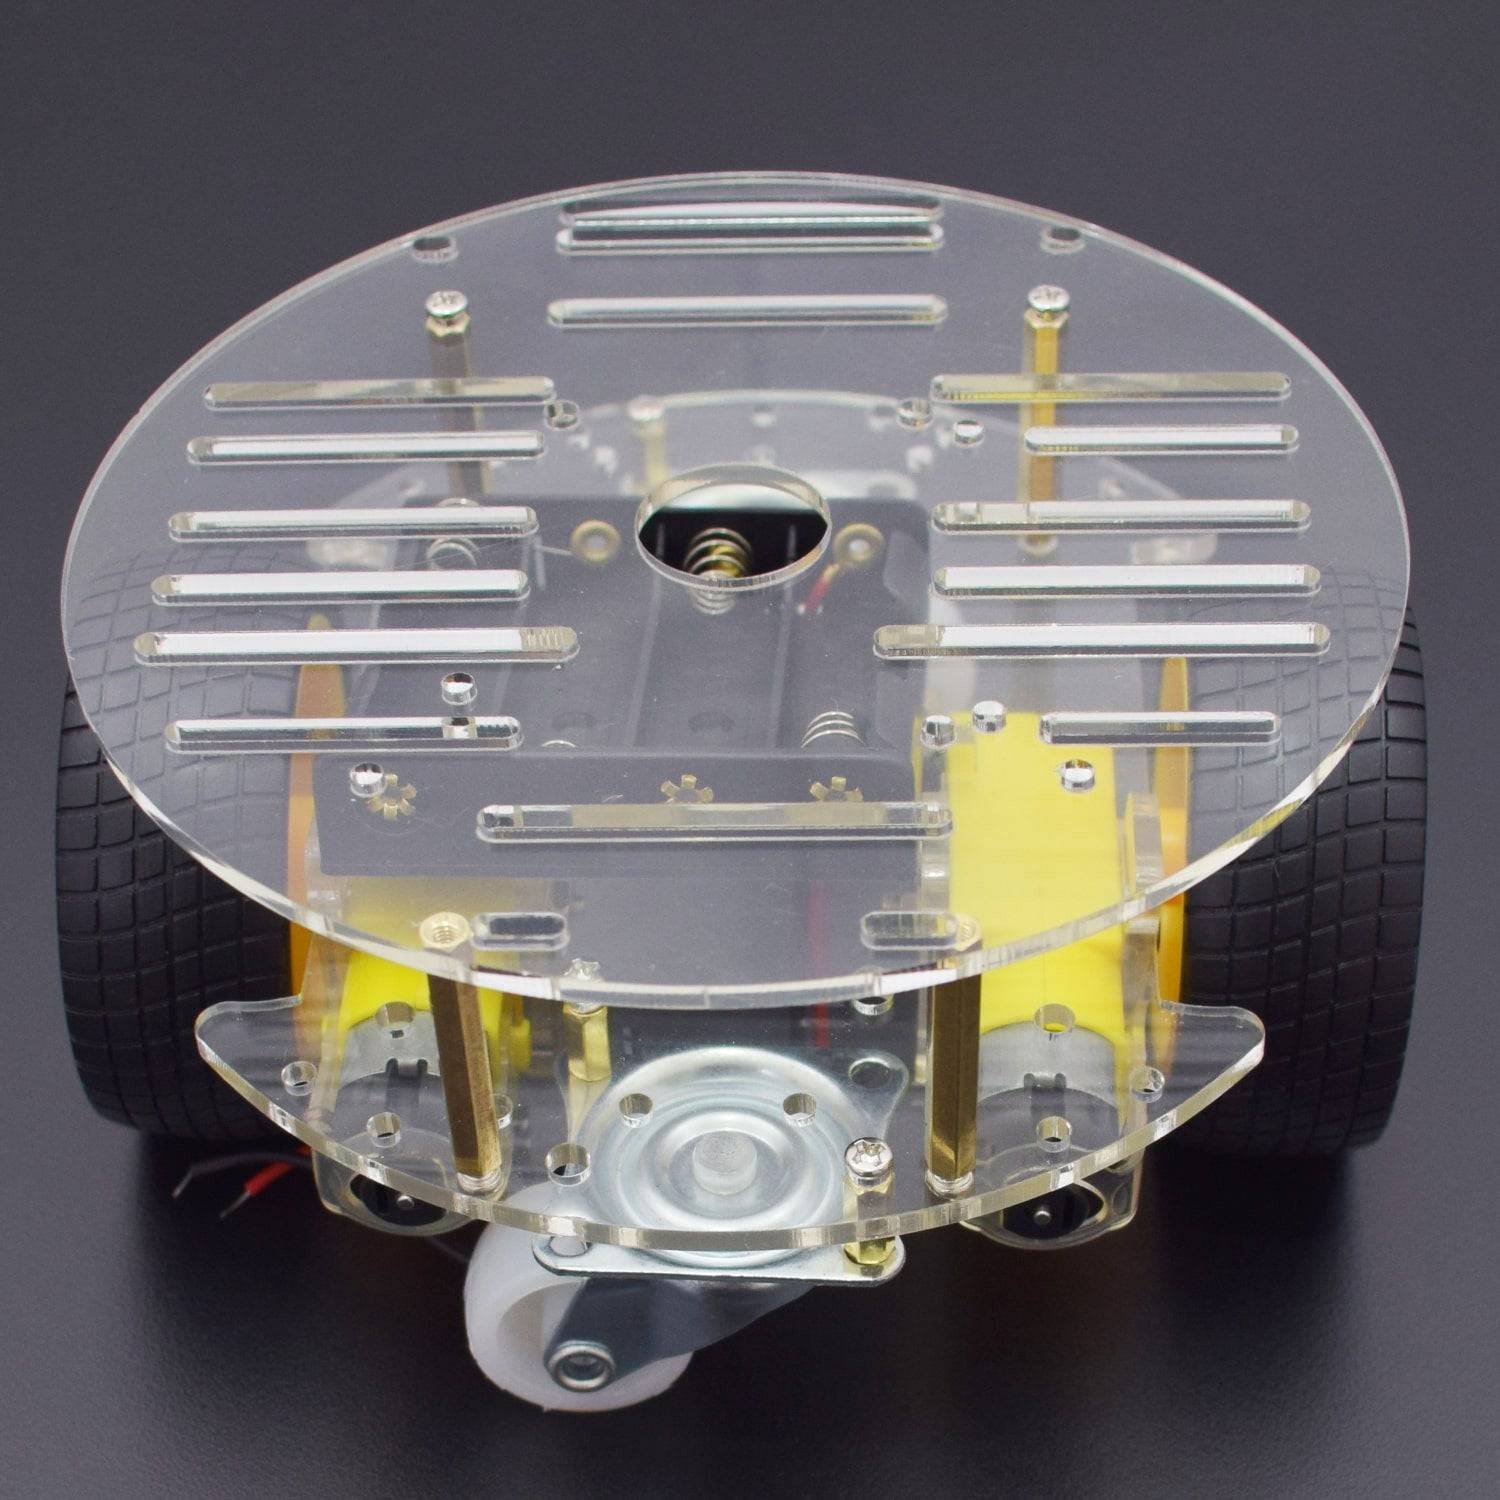 Smart car chassis 2wd / robot tracing strong magnetic motor car rt-4 / avoidance car with code disk for arduino - RS436 - REES52